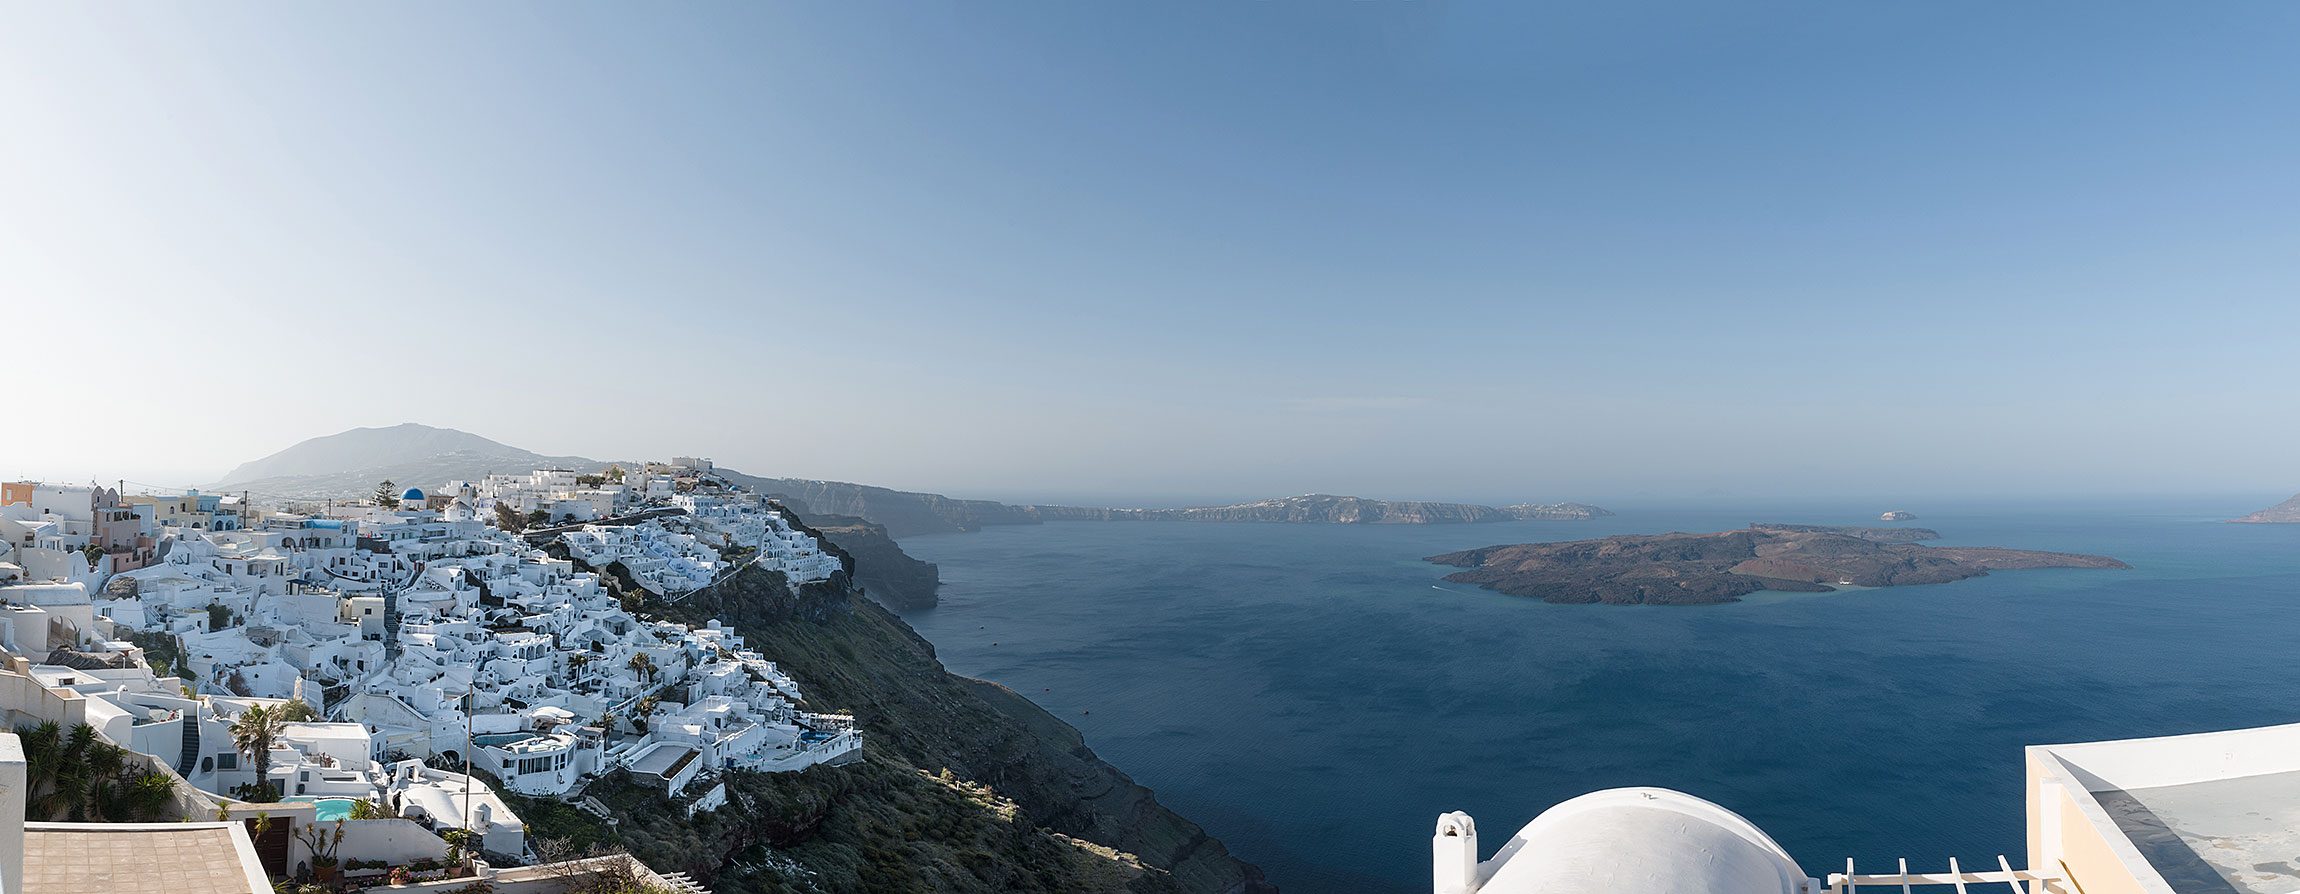 santorini accommodation special offers